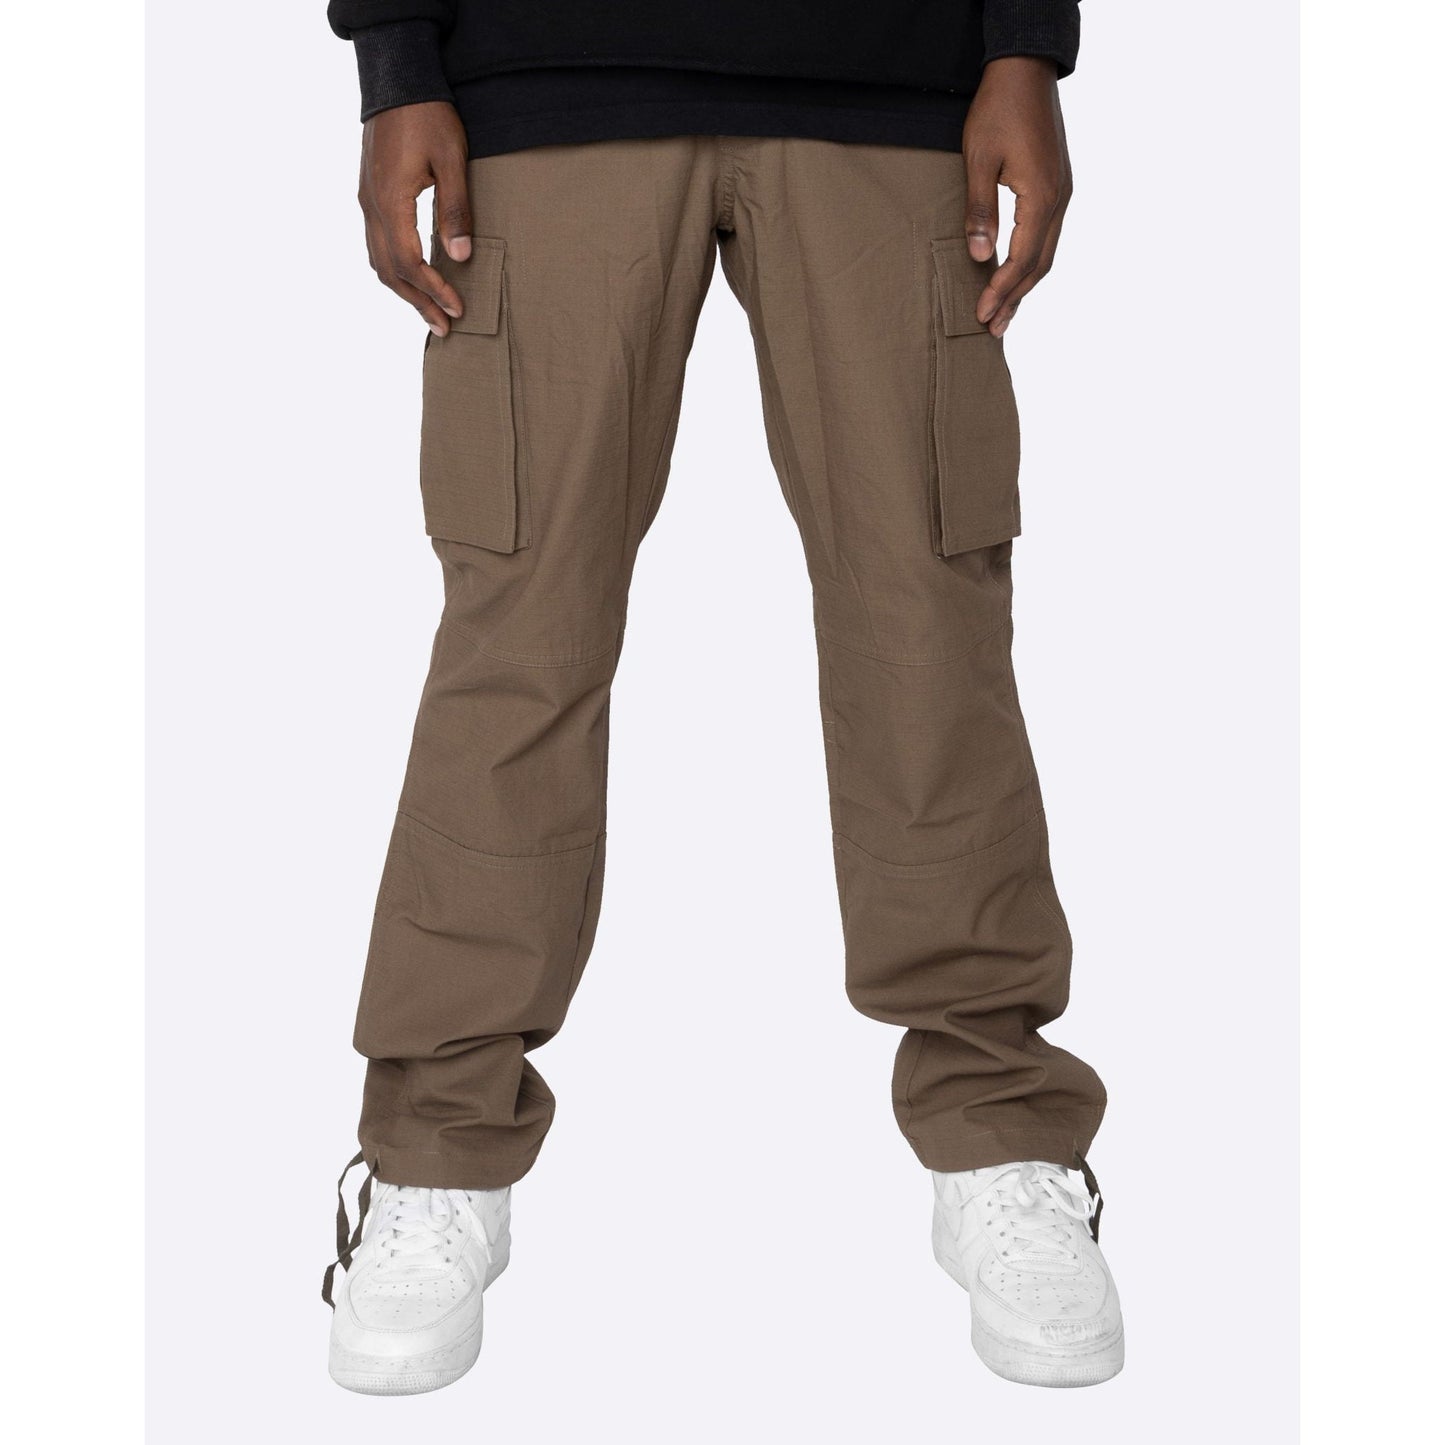 EPTM – NEW STANDARD CARGOS [BROWN] – All Day Sneakers